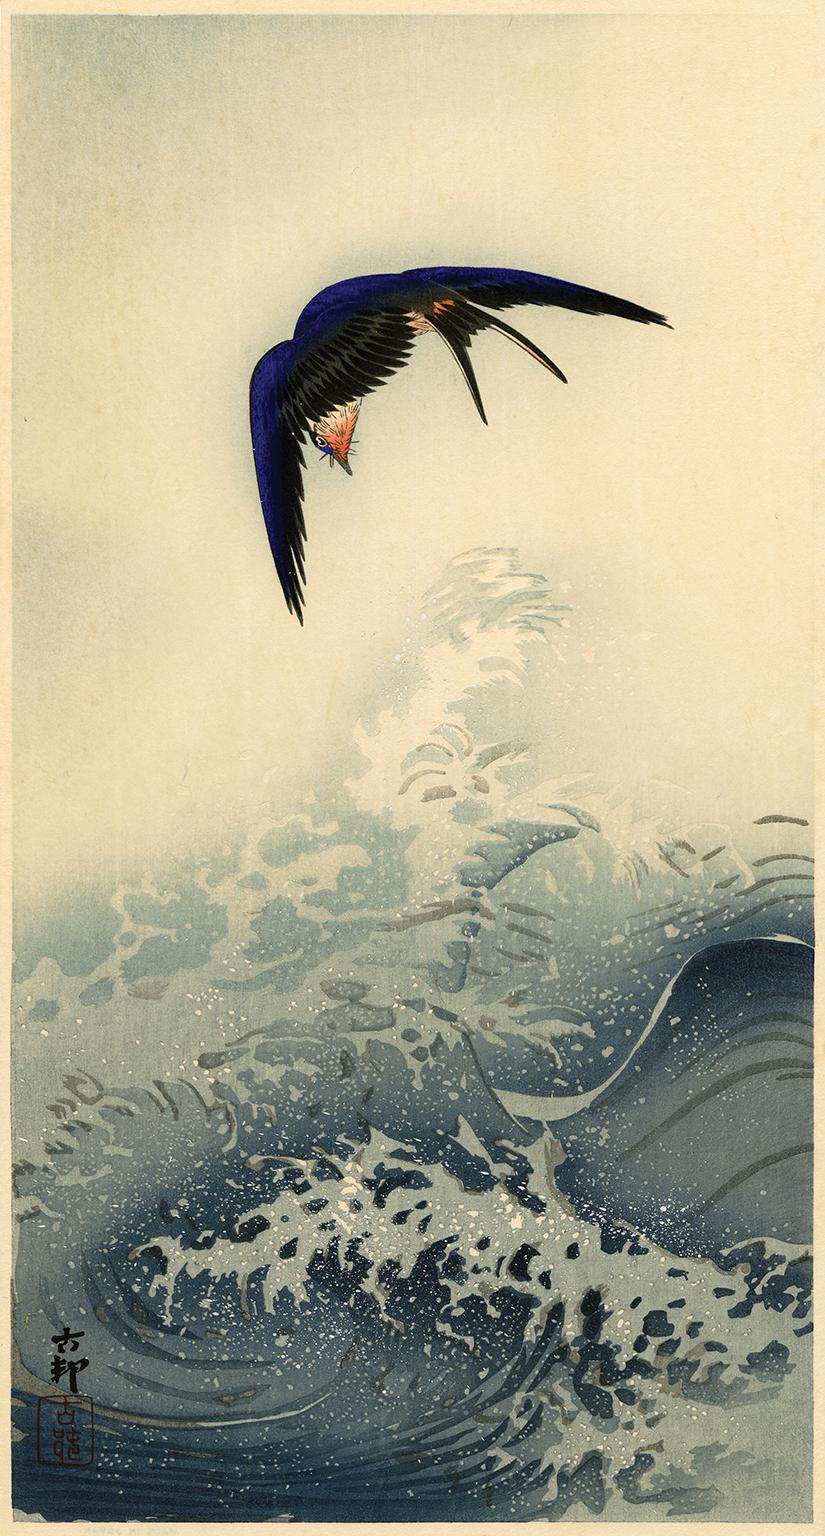 Ohara Koson Landscape Print - Swallow over the Ocean Waves